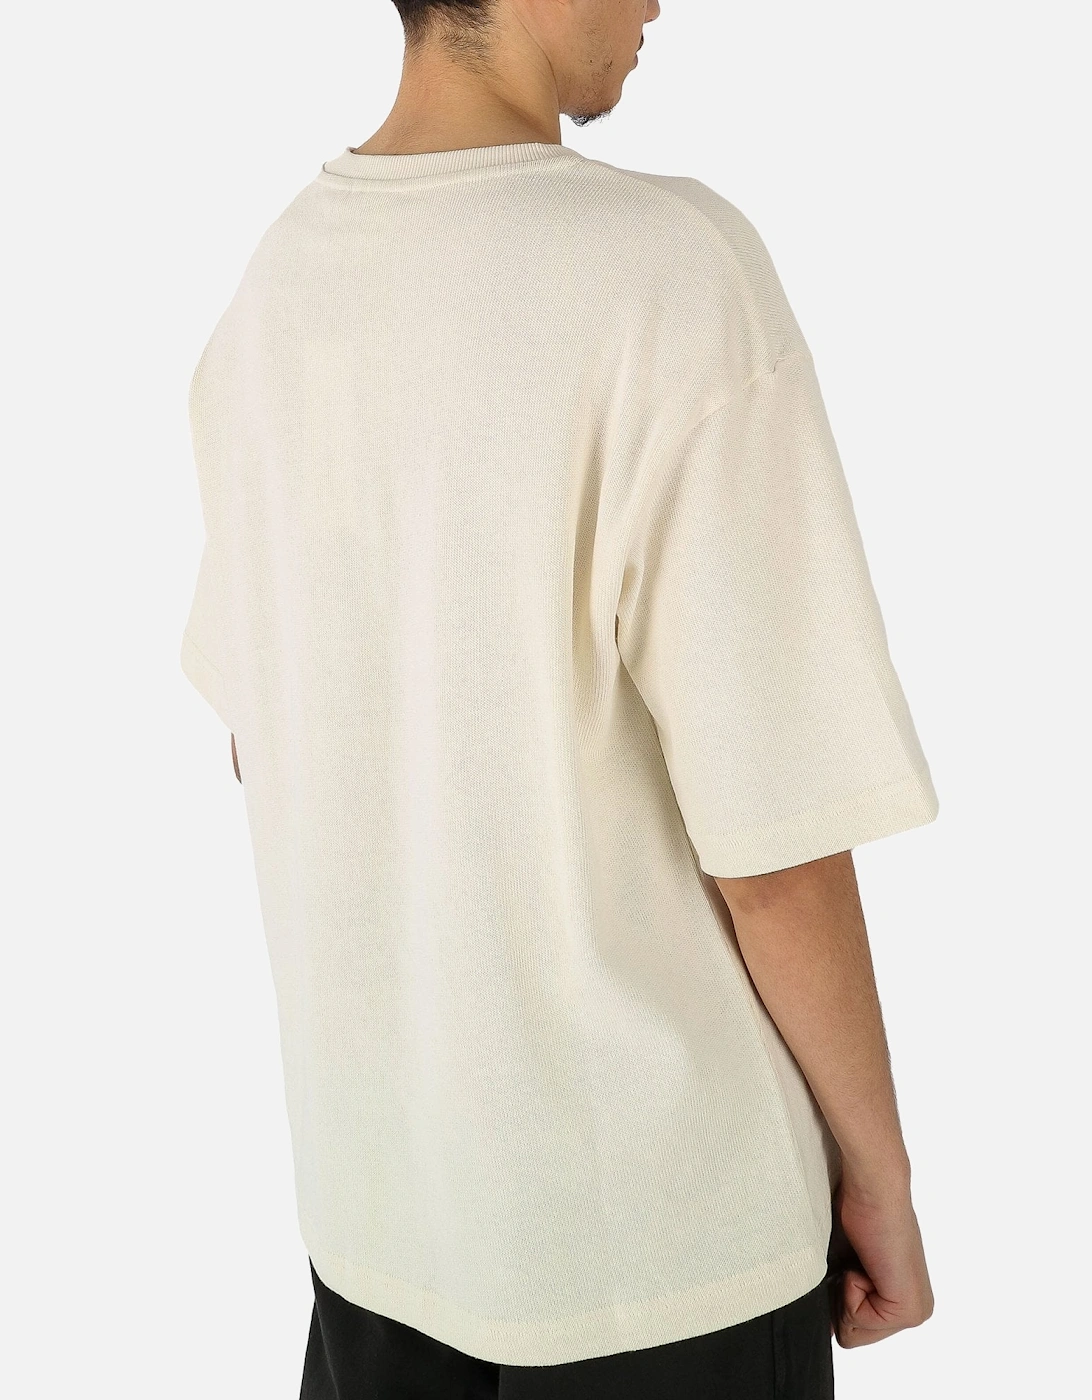 Knitted SS white Tee